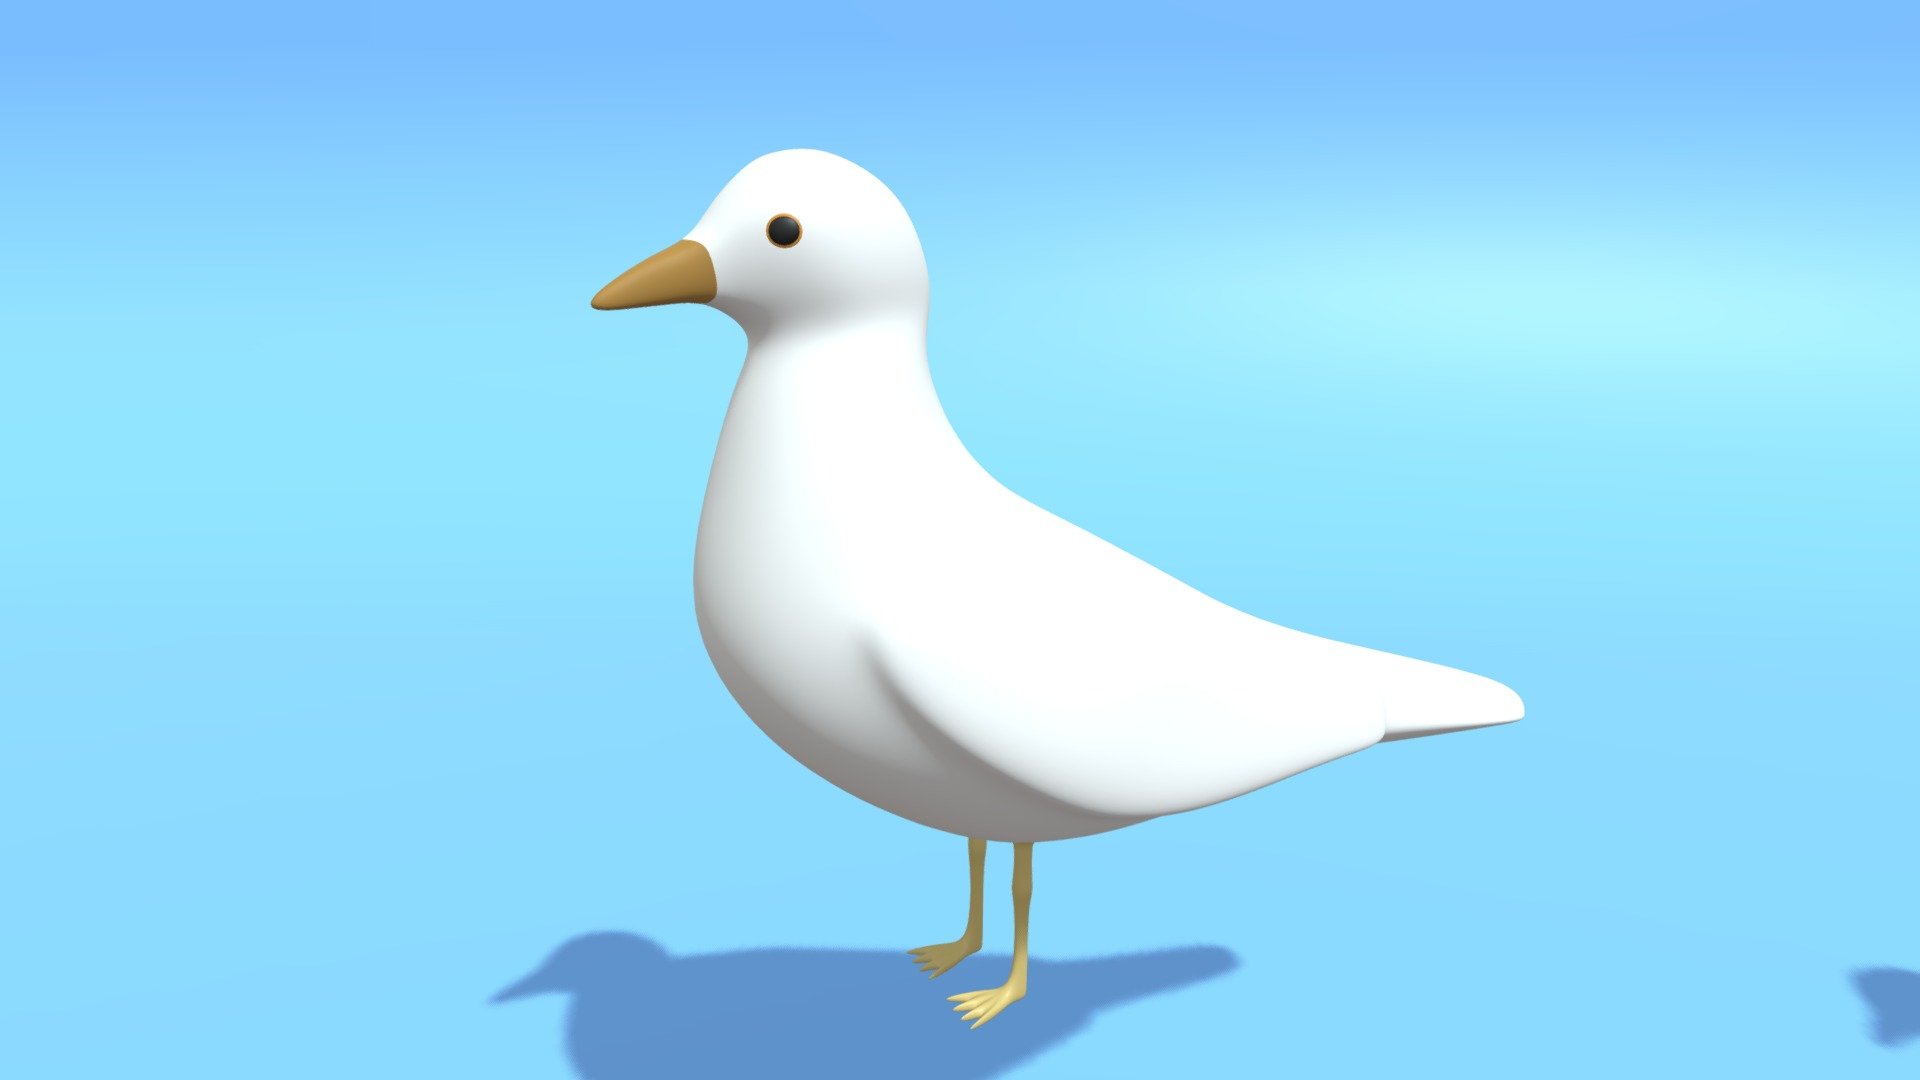 Cartoon Cute Bird Seagull.

-1 model contains 1 object.

-Subdivision Level 3 : Verts : 27,466 Faces : 27,456.

-Subdivision Level 2 : Verts : 11,482 Faces : 11,472.

-Subdivision Level 1 : Verts : 6,874 Faces : 6,864.

-Subdivision Level 0 : Verts : 2,878 Faces : 2,868.

-Materials and objects have the correct names.

-This product was created in Blender 2.8.

-Formats: blend, fbx, obj, c4d, dae, abc, stl, glb,unitypackage.

-We hope you enjoy this model.

-Thank you 3d model